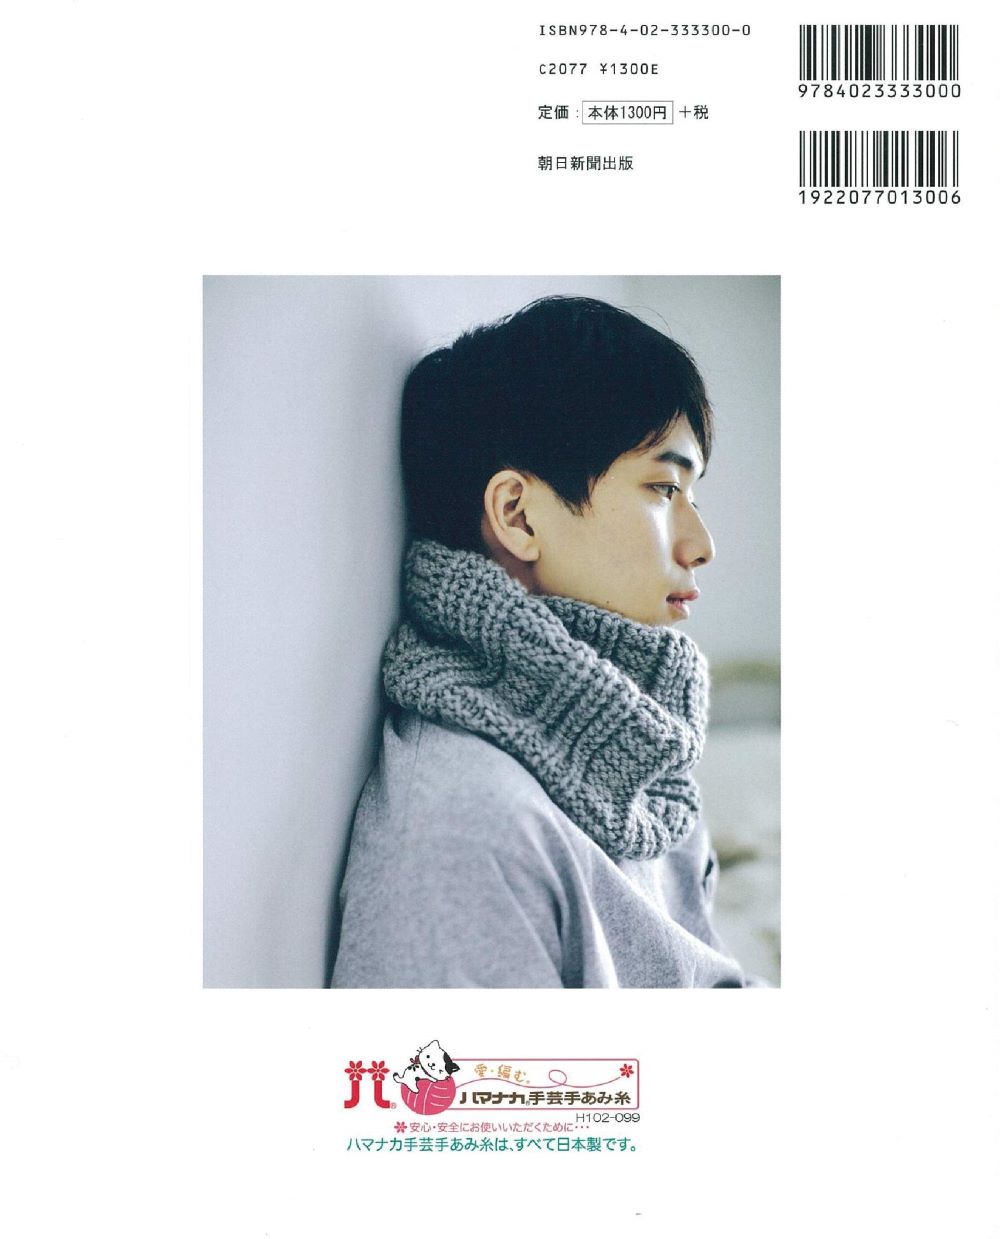 Mens knit book with simple design